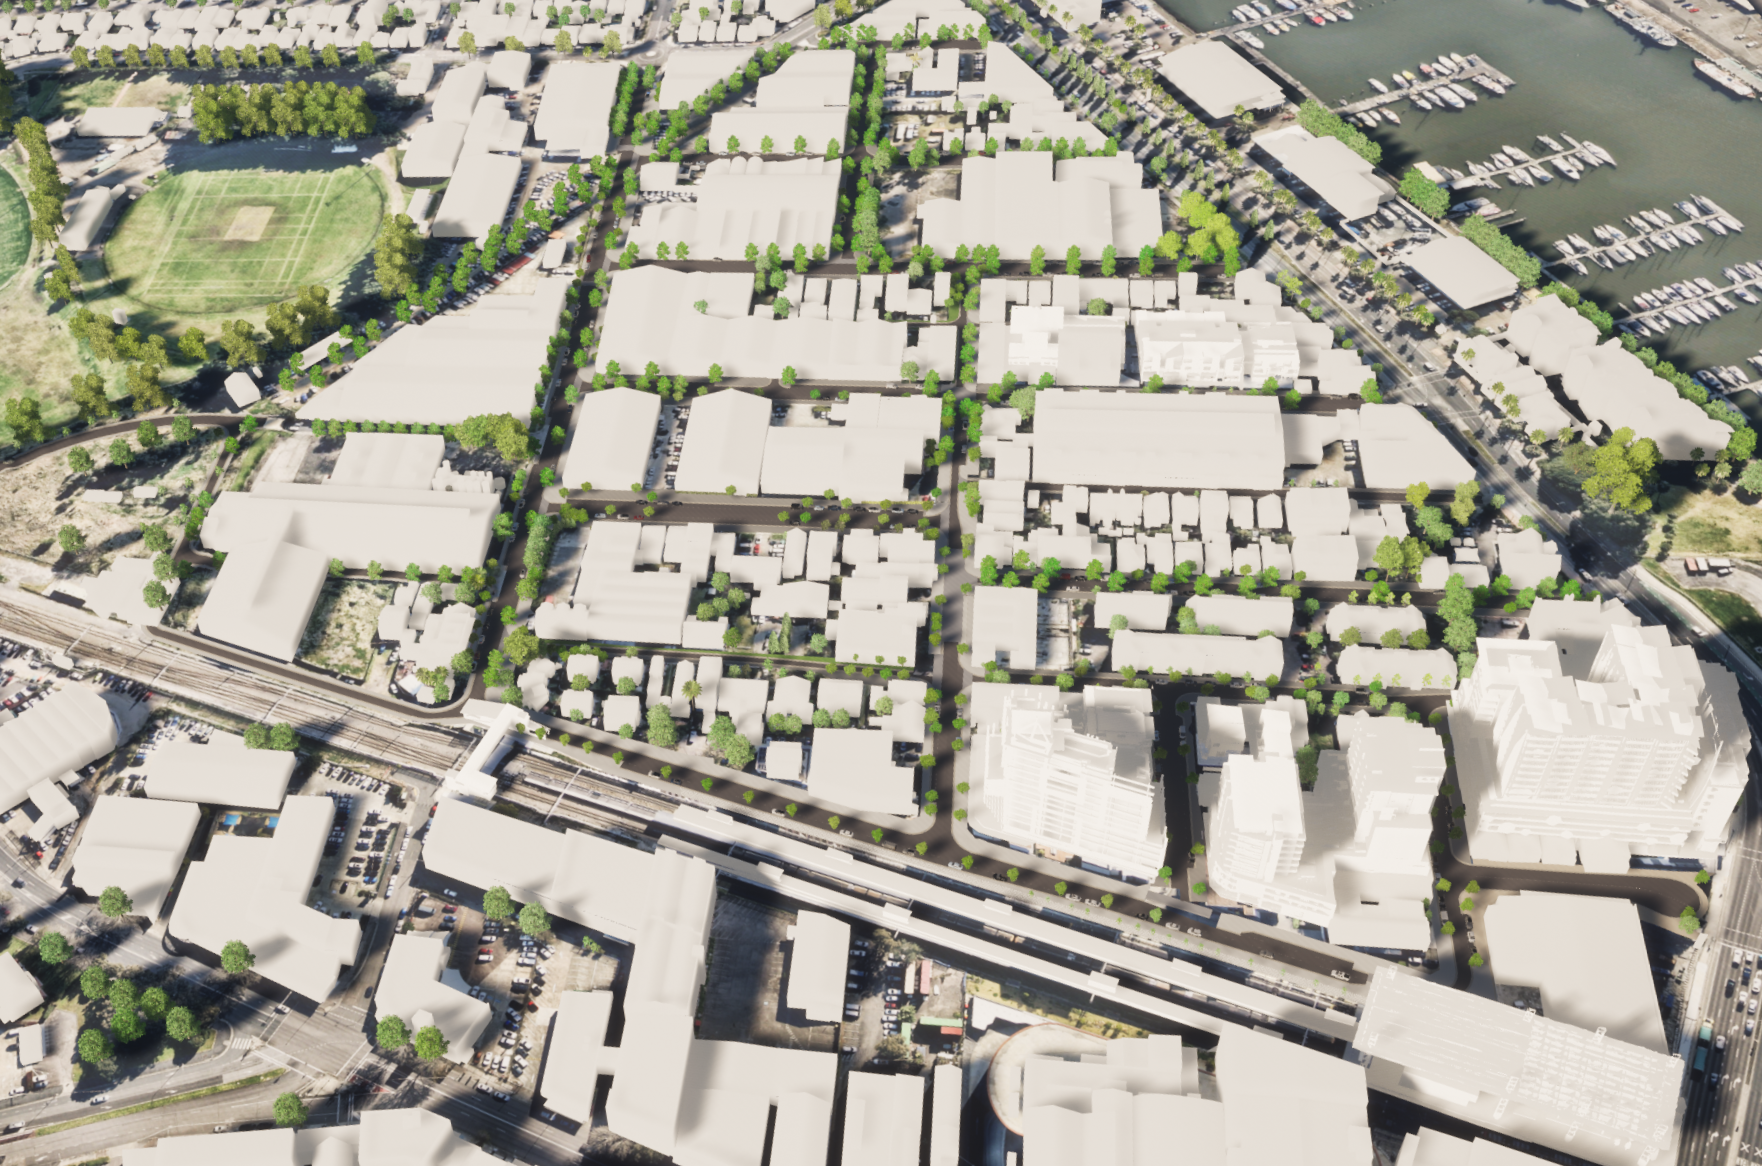 A 3D birds-eye view rendering of the Wickham area in Newcastle. There are 3D rendered buildings casting shadows. The majority of the streets are lined by trees. The railway line is running along at the bottom of the image. On the left, above the railway line are Wickham Park, surrounded by trees. Running from north to south are Railway Street, Union Street and Foundry Street. In the top right corner of the image are boats docked at Throsby Creek. 